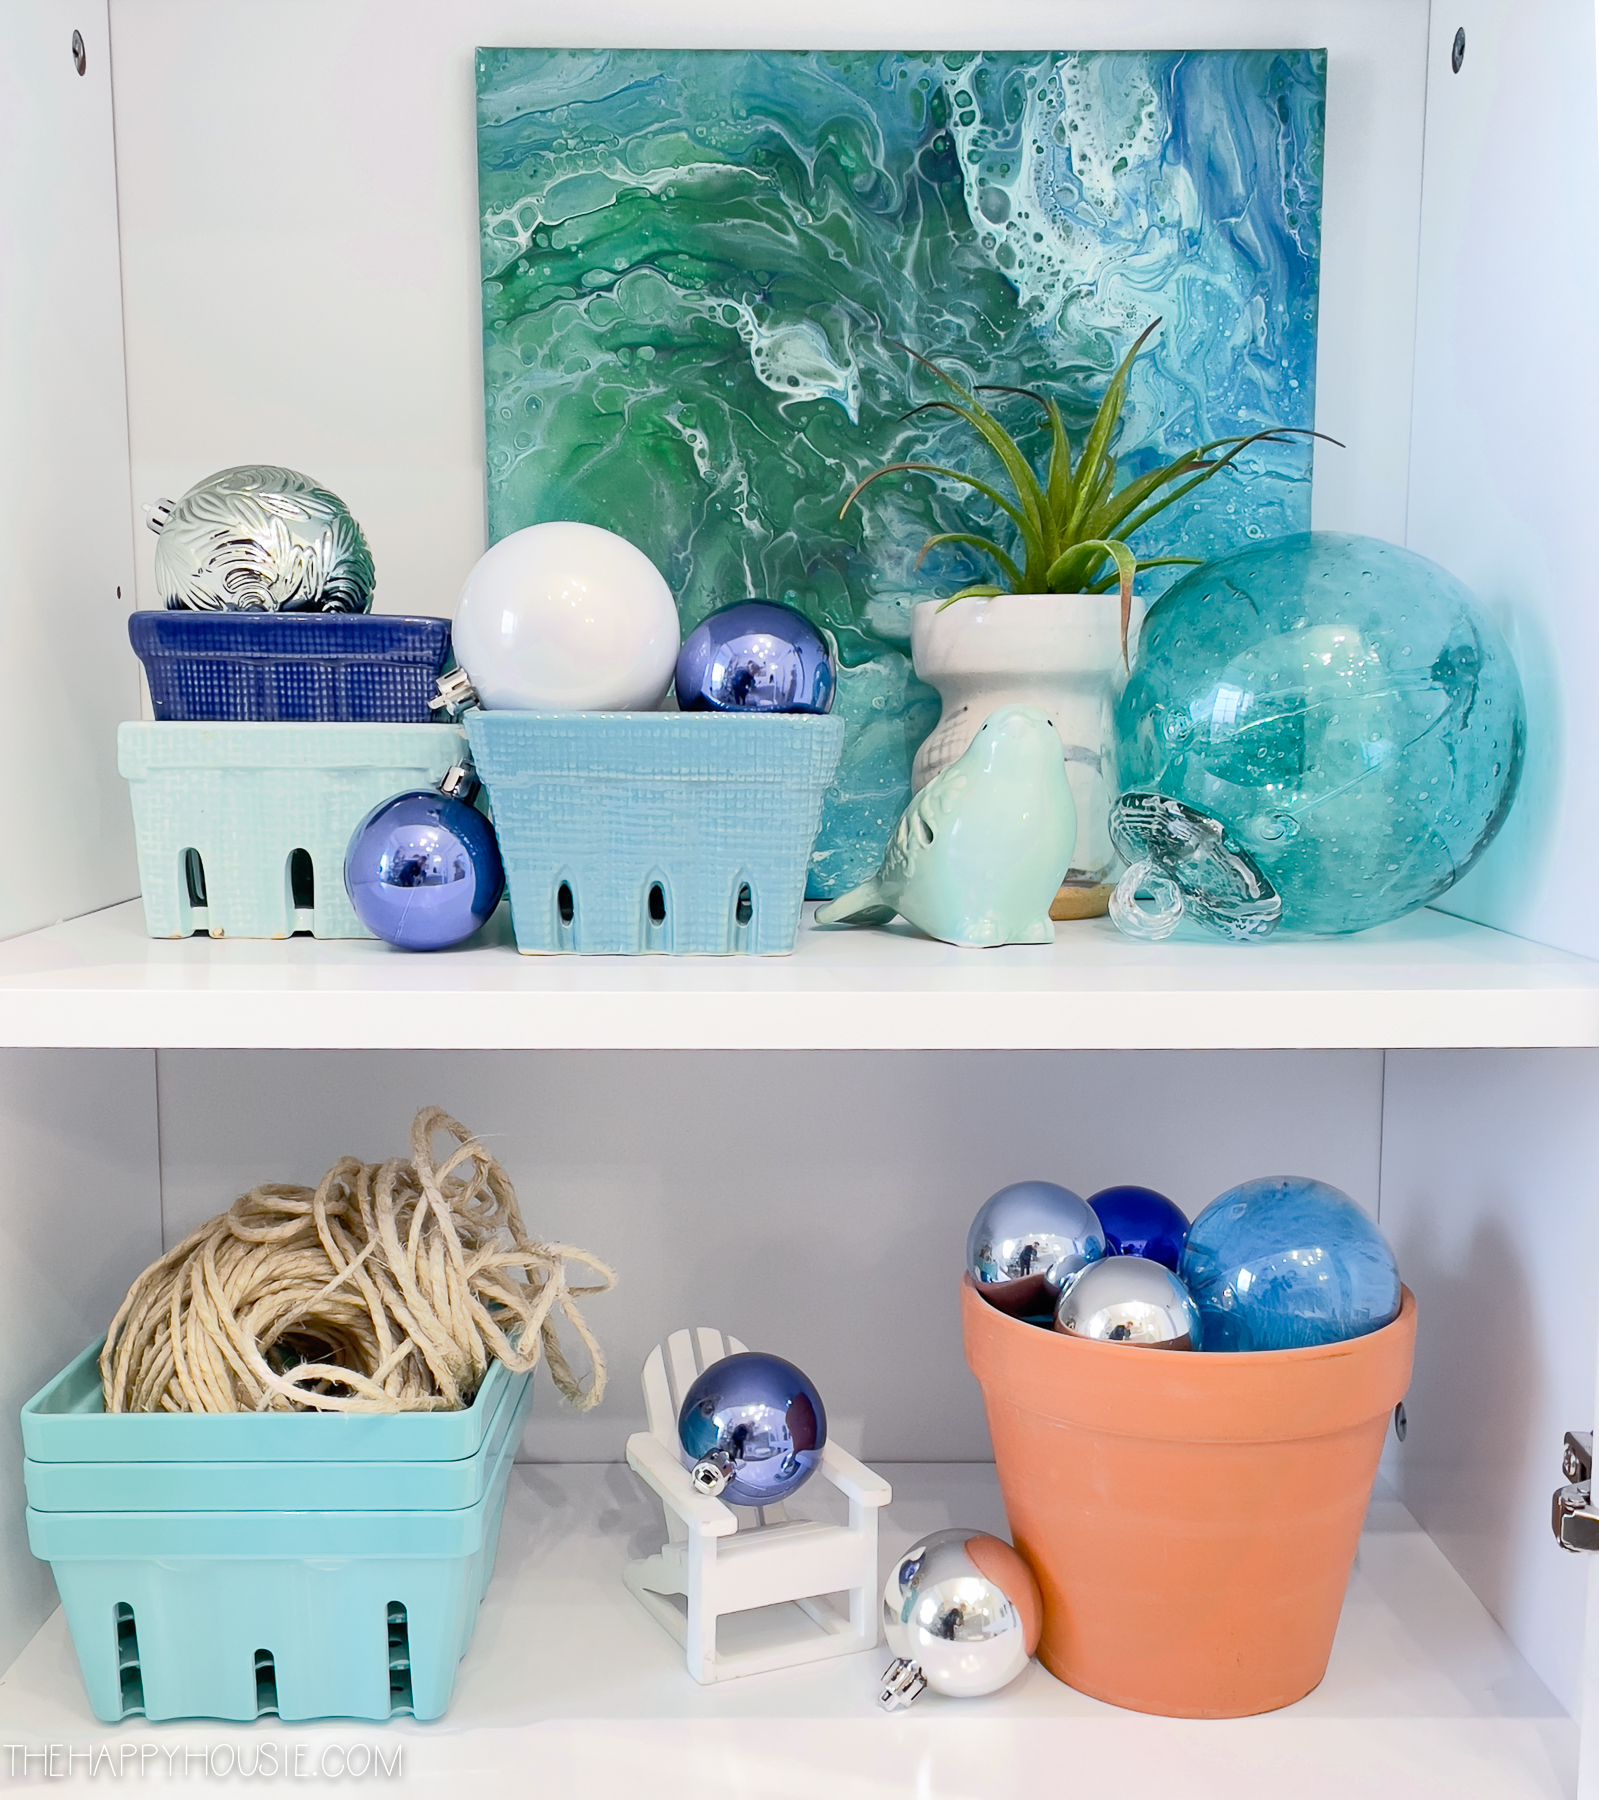 Blue and silver Christmas balls are on the shelves.